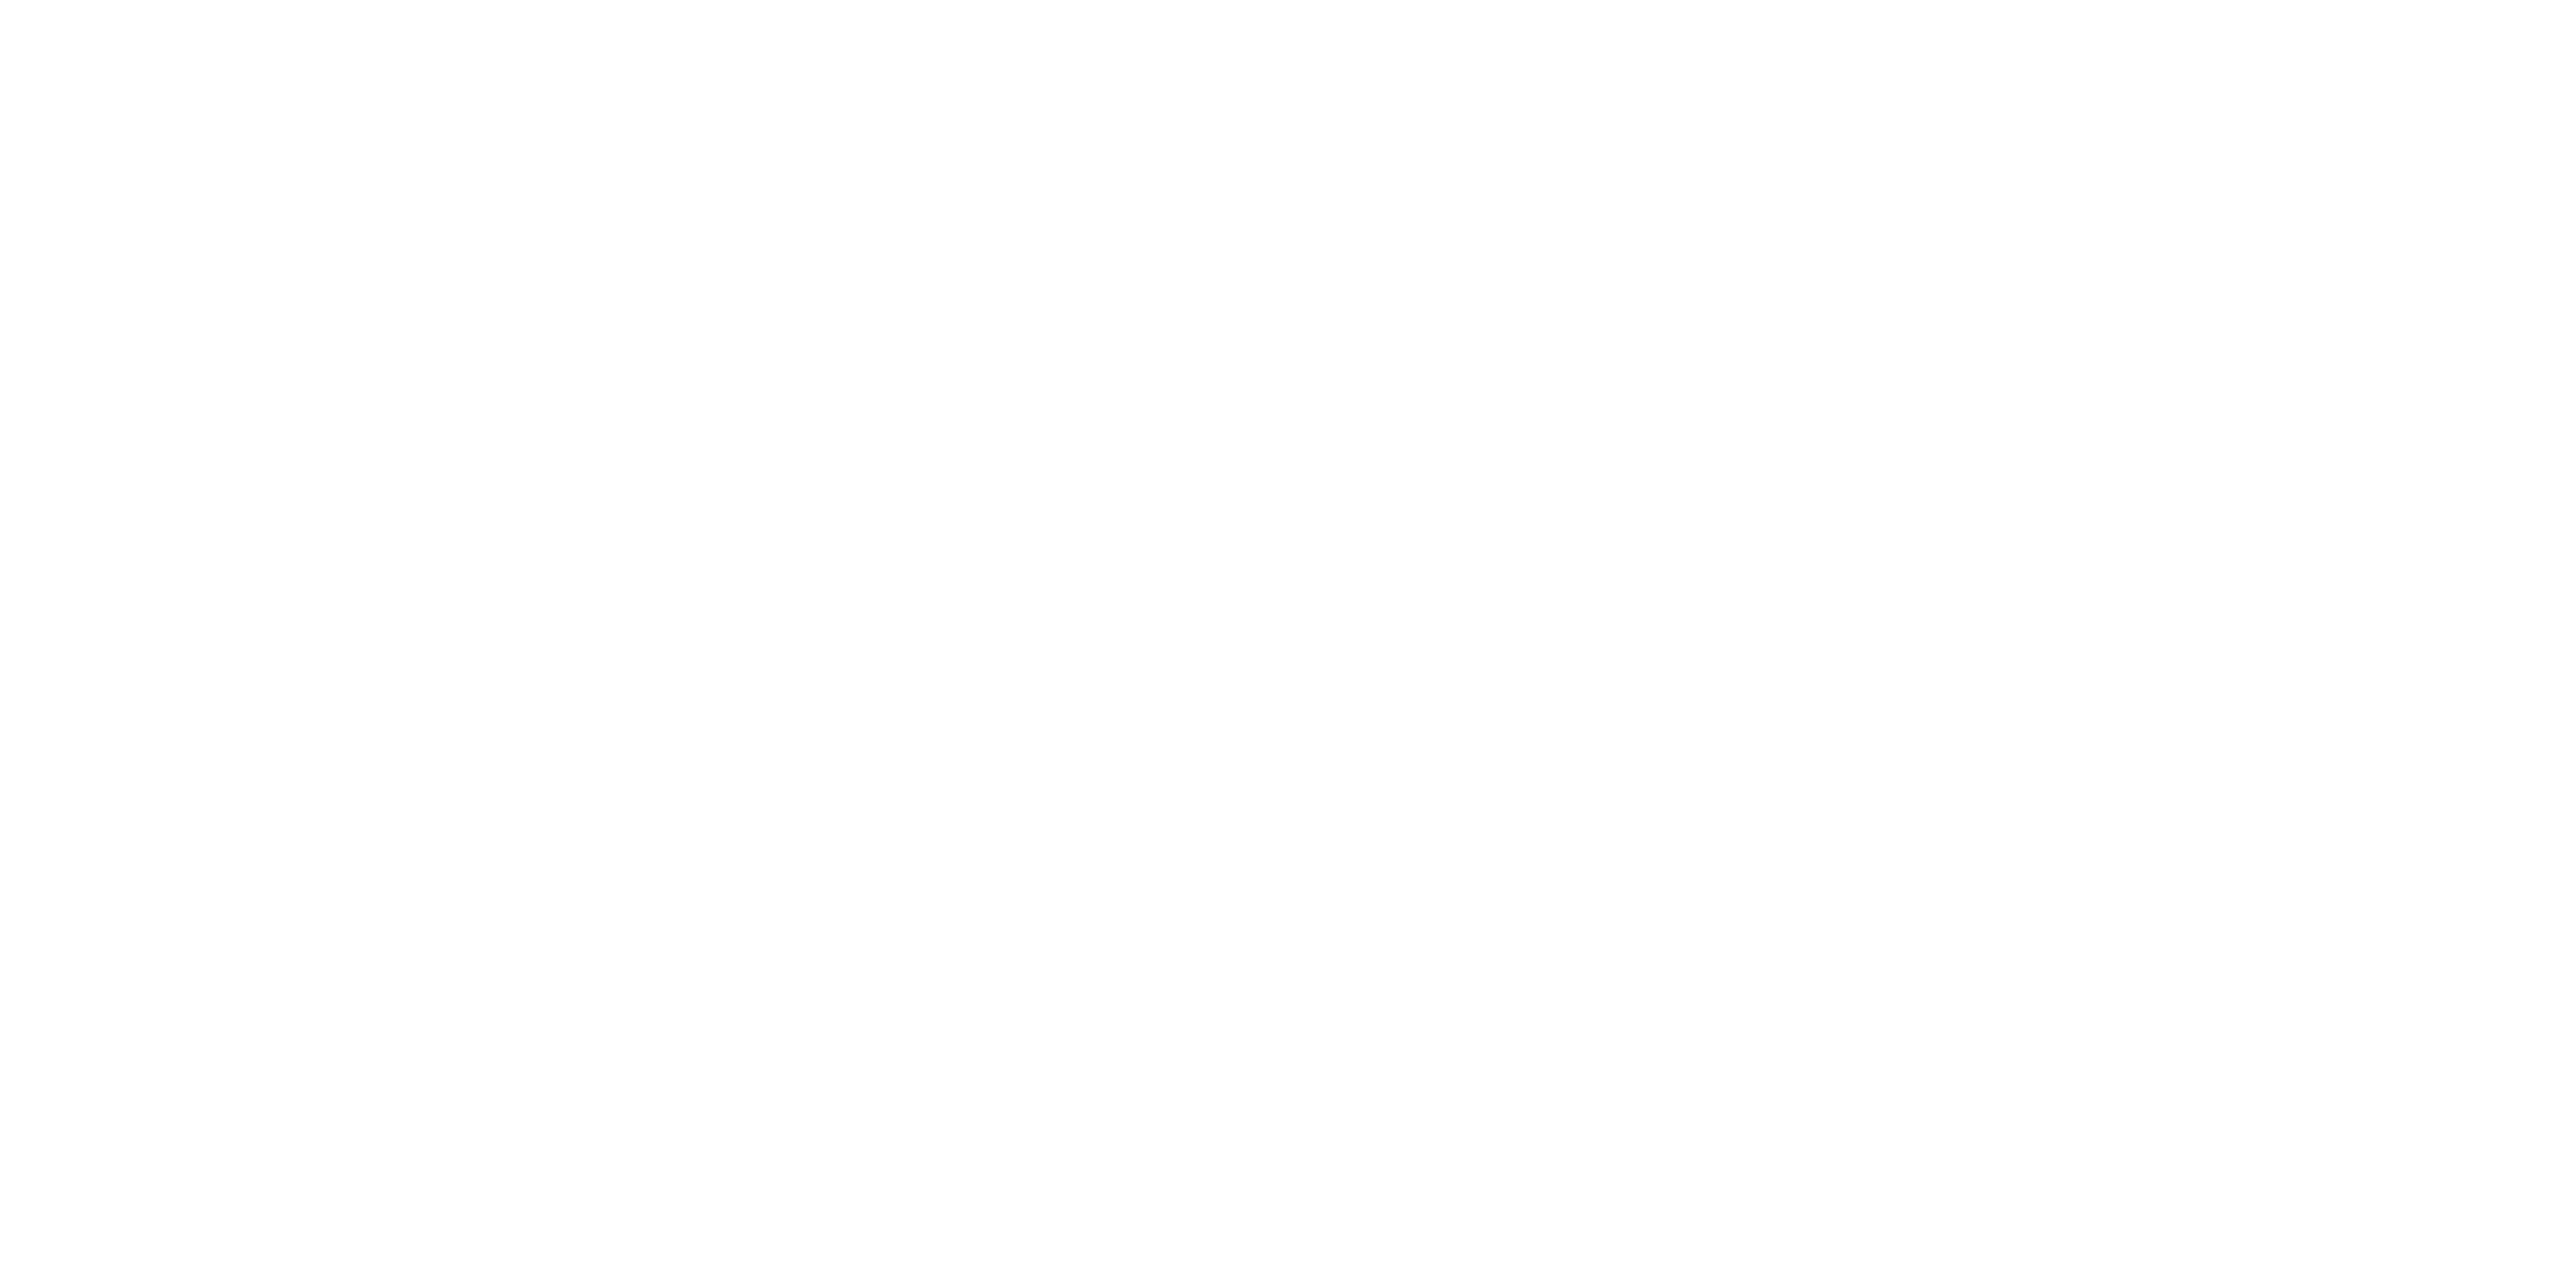 SPIN, Inc